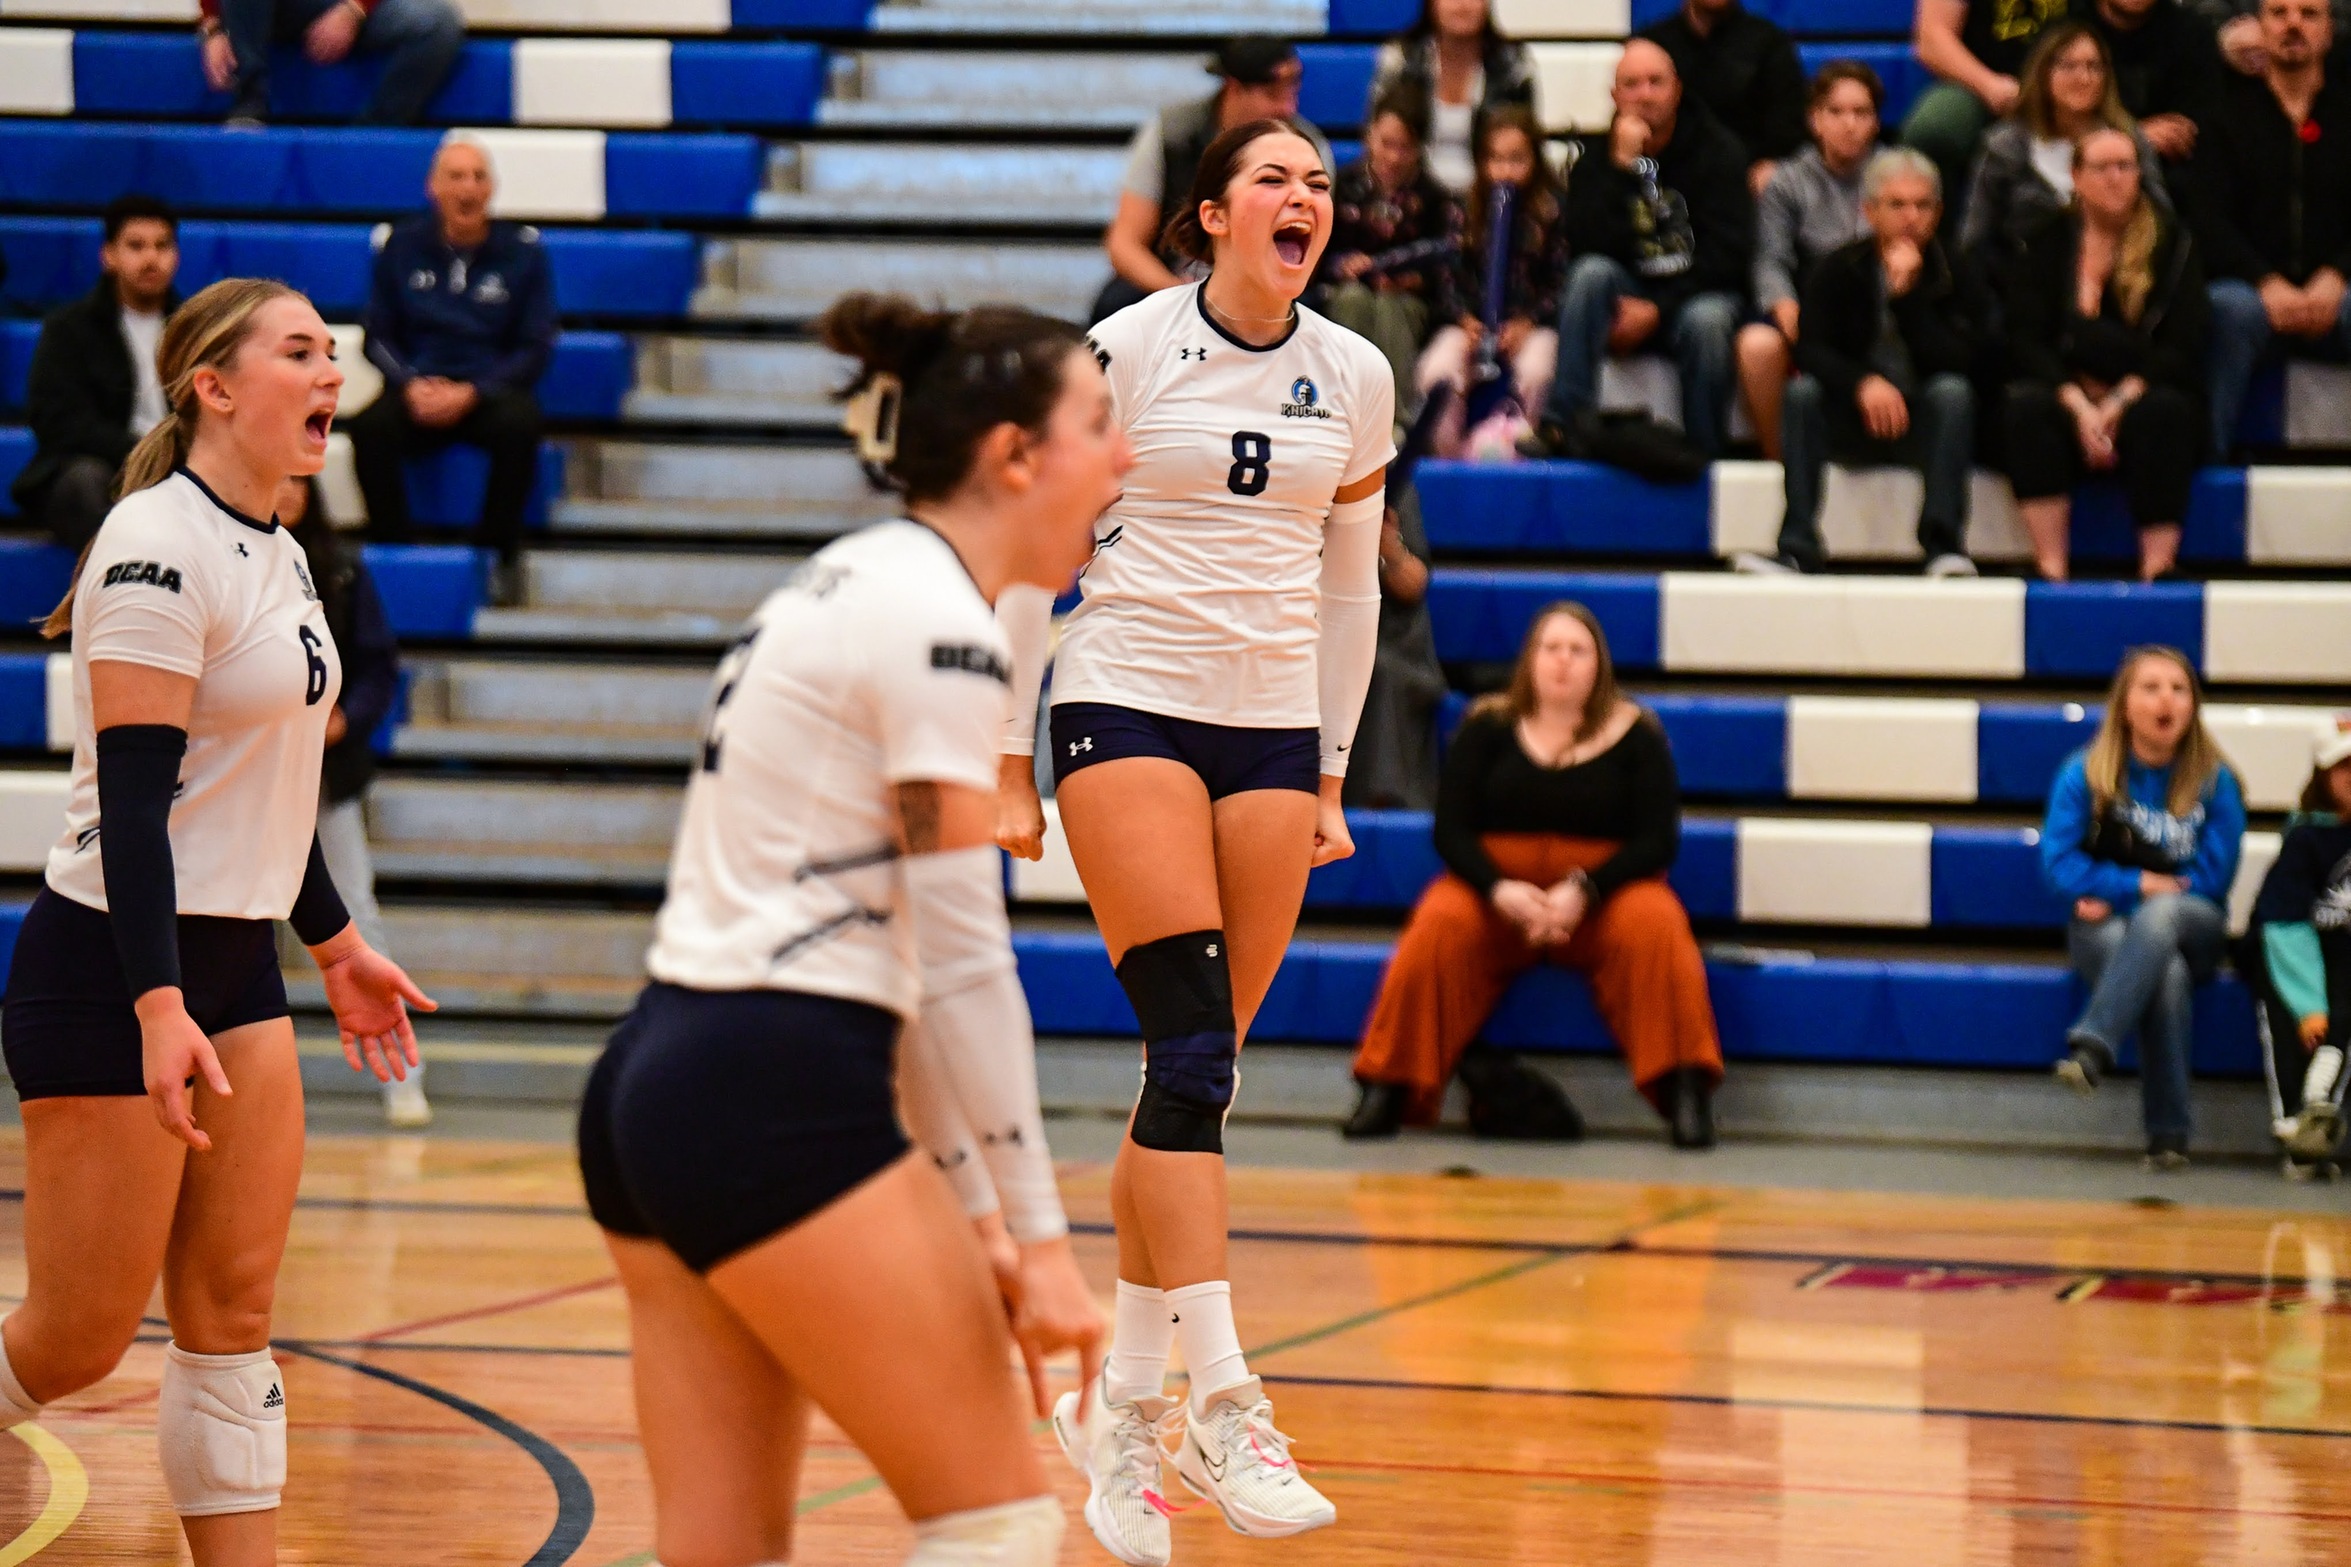 Niagara Knights women’s volleyball conquer the Mountaineers